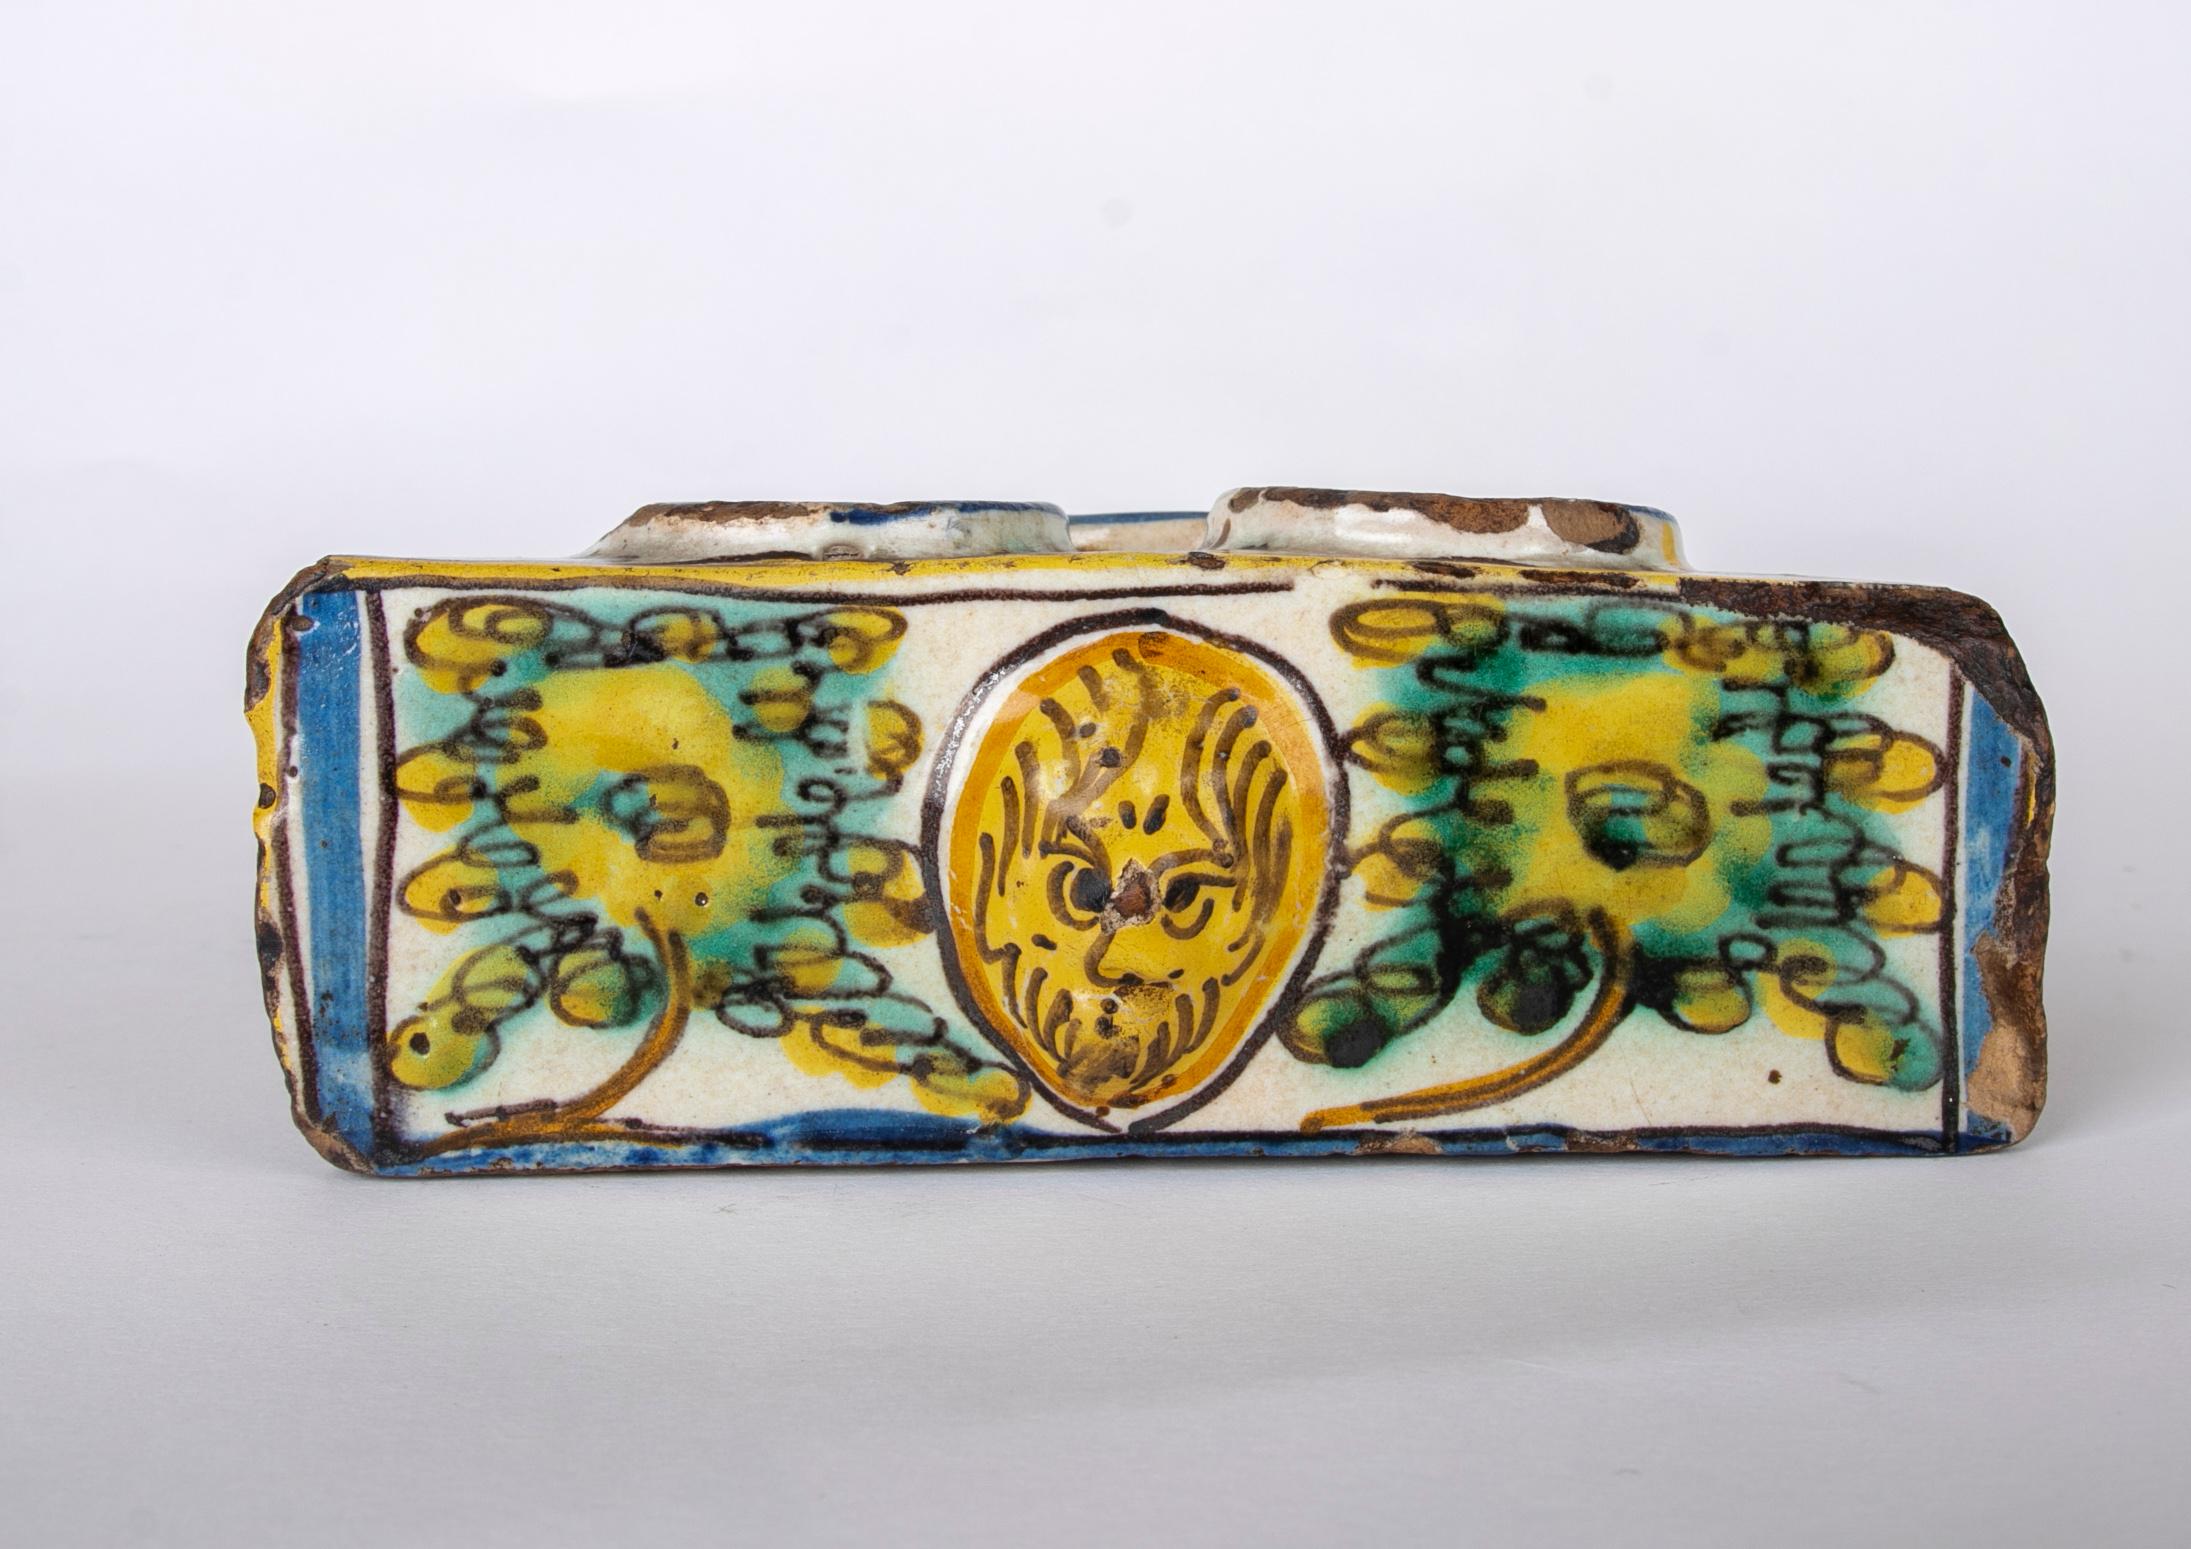 Talavera Glazed Ceramic Inkwell in its characteristic tones For Sale 7